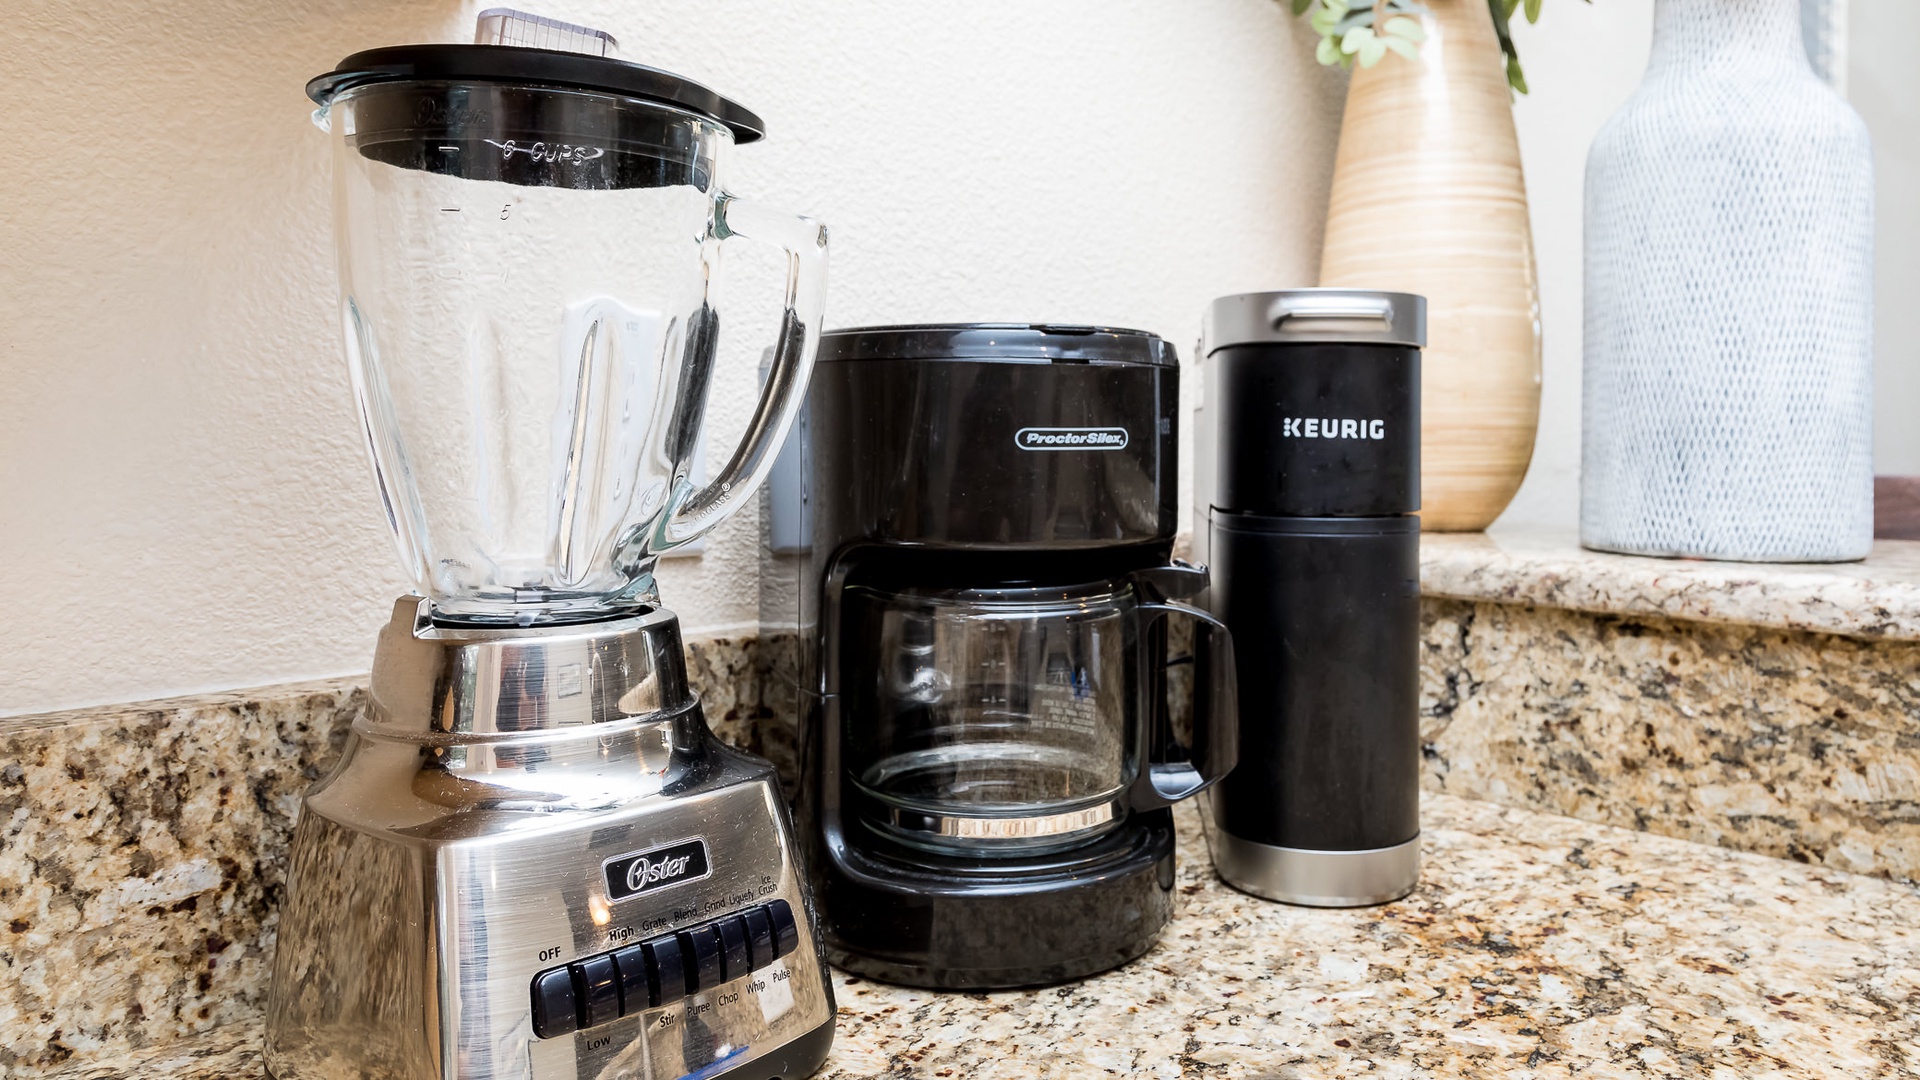 Fully equipped kitchen with blender, coffeemaker, and Keurig